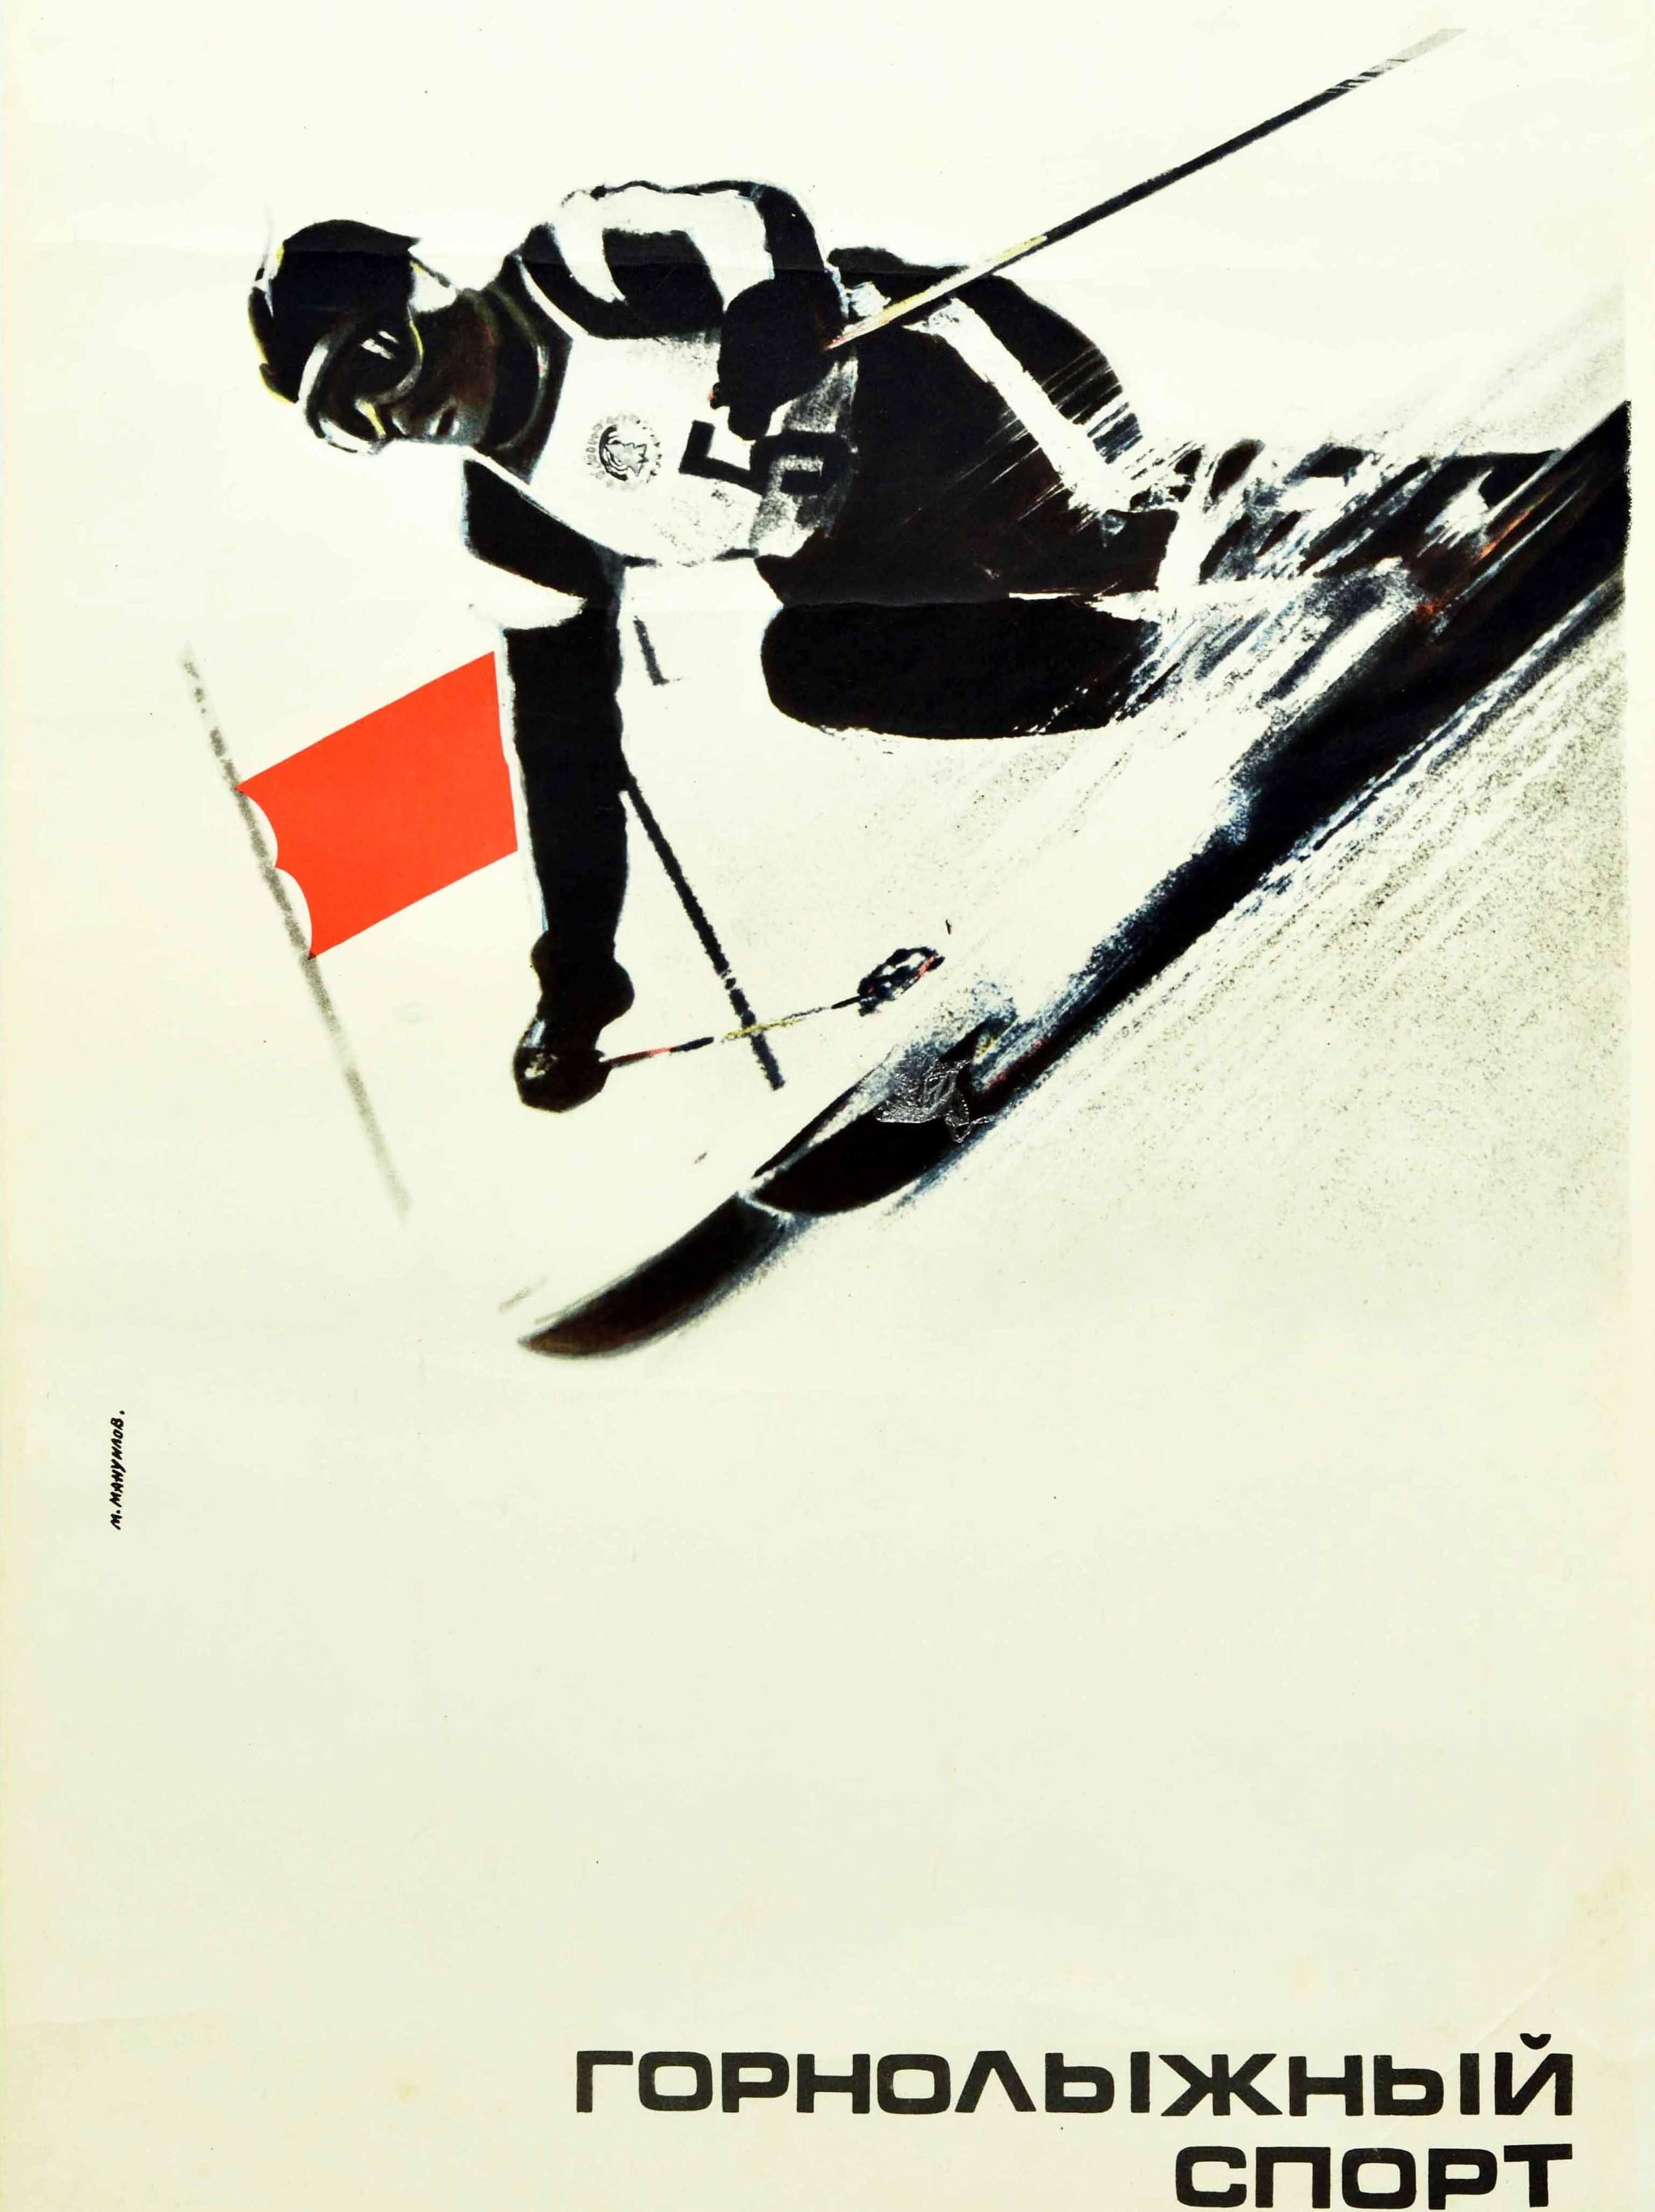 Original vintage skiing winter sport poster featuring a dynamic illustration of a skier in ski gear depicted in black and white zooming down a snowy slope at speed past a red flag with the title in bold black letters below. Issued by the Department